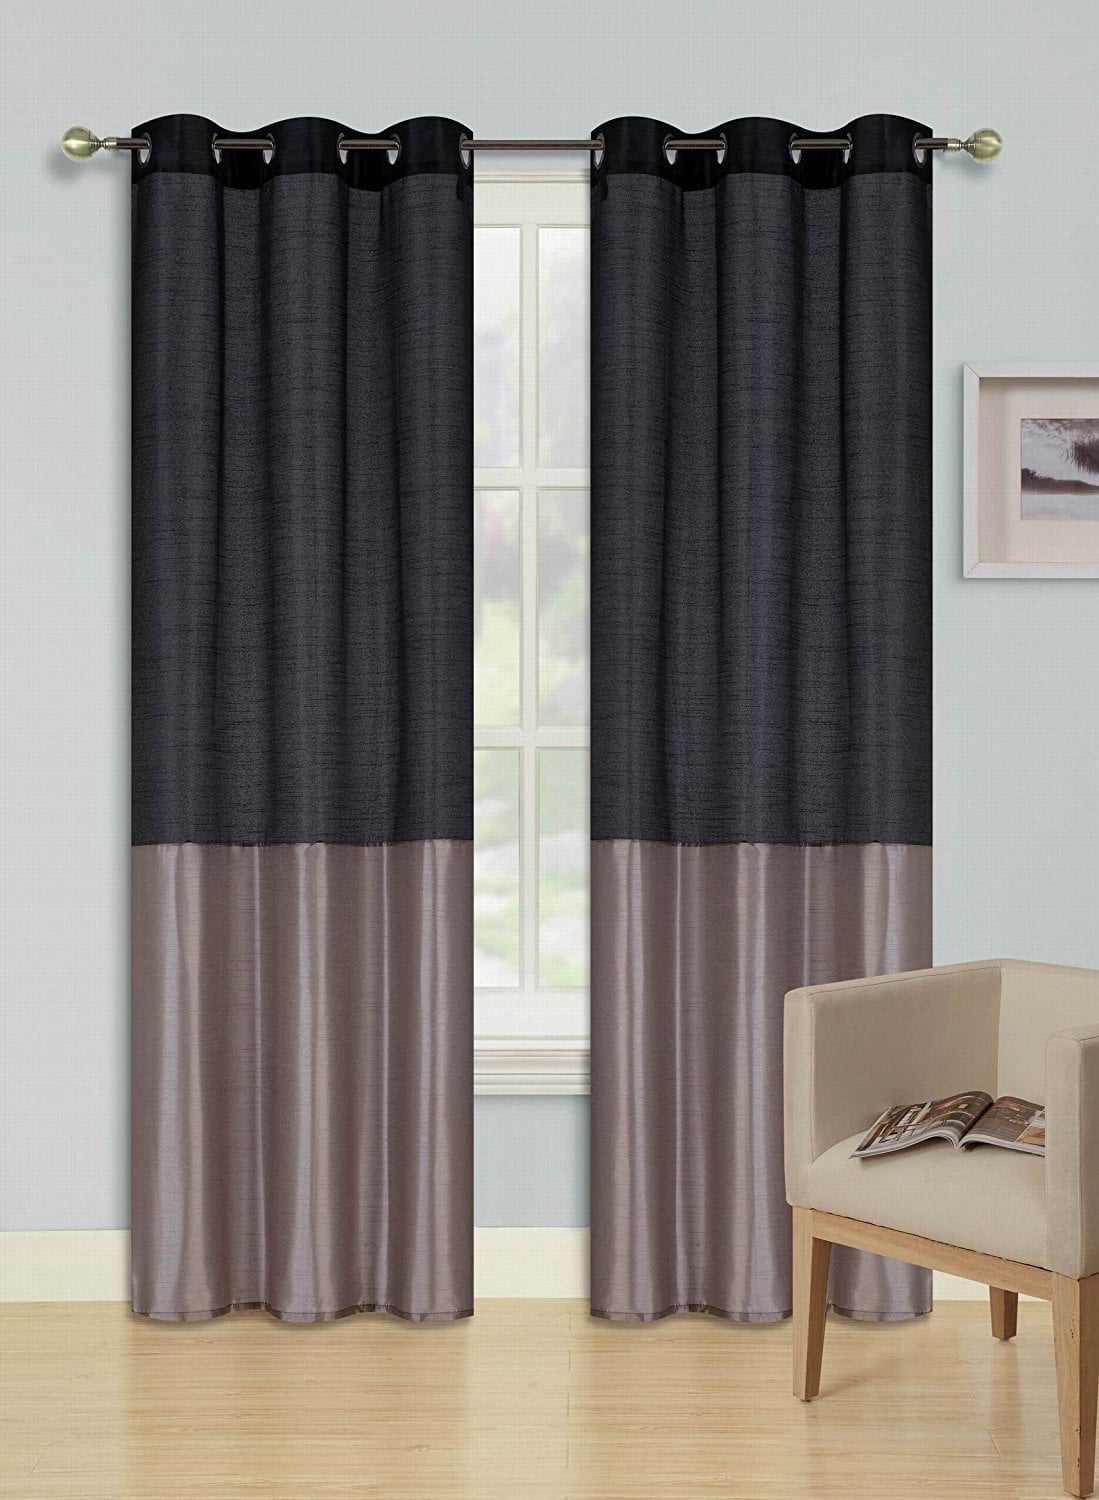 EID ORANGE WHITE Insulated Lined Blackout Grommet Window Curtain Panel PAIR 